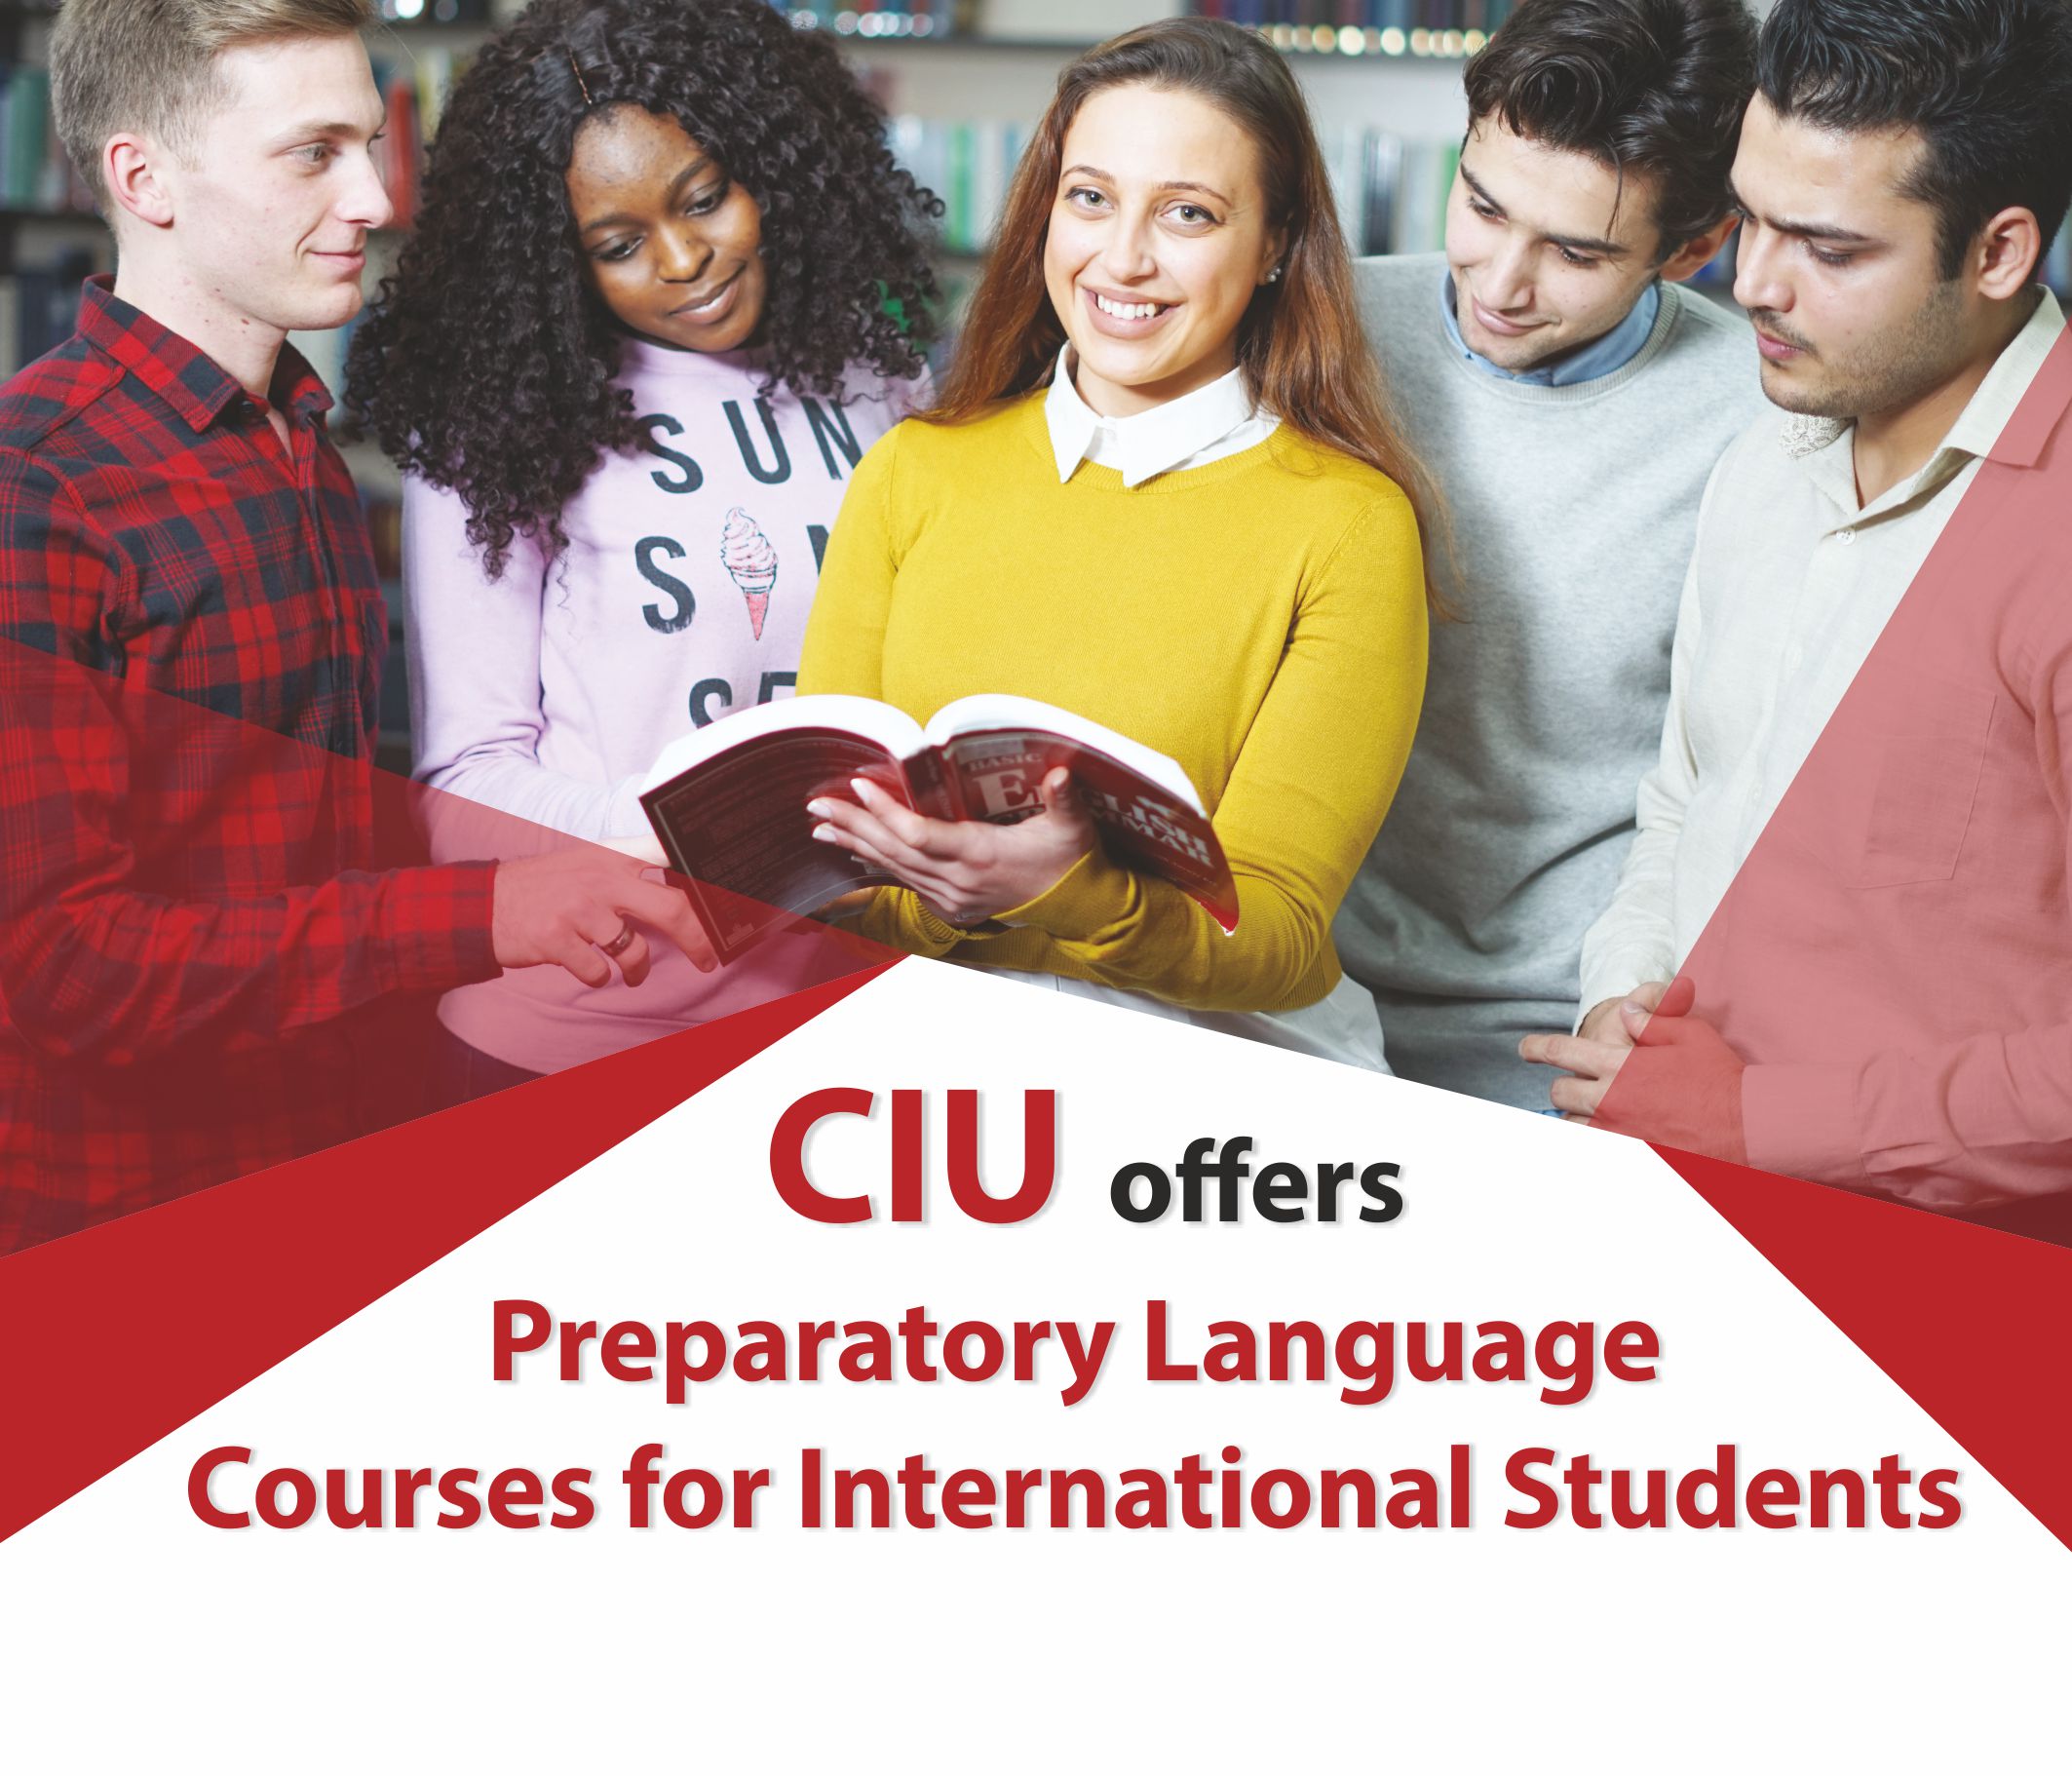 CIU OFFERS PREPARATORY LANGUAGE COURSES FOR INTERNATIONAL STUDENTS